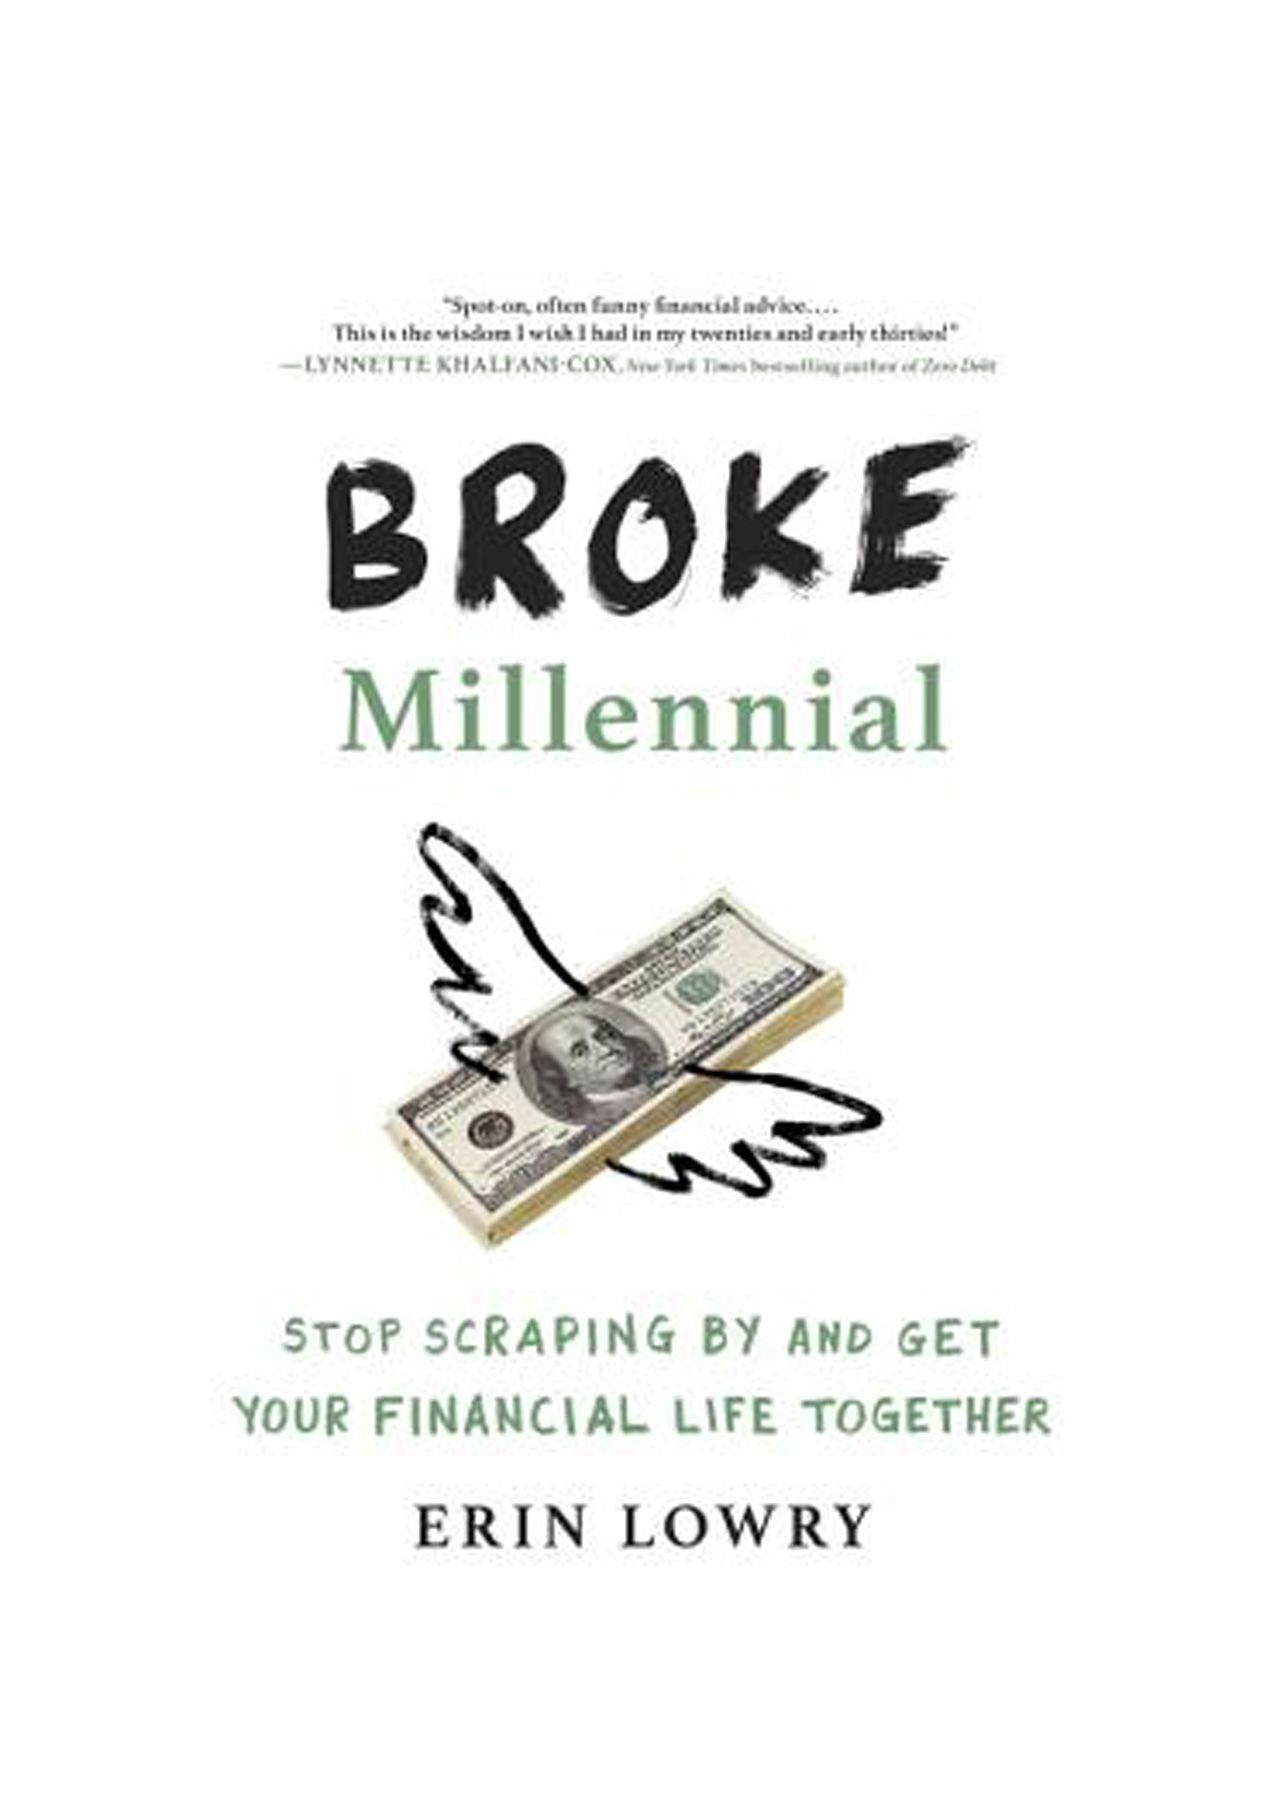 Good Books to Read in Your 20s: ‘Broke Millennial: Stop Scraping By and Get Your Financial Life Together’ by Erin Lowry